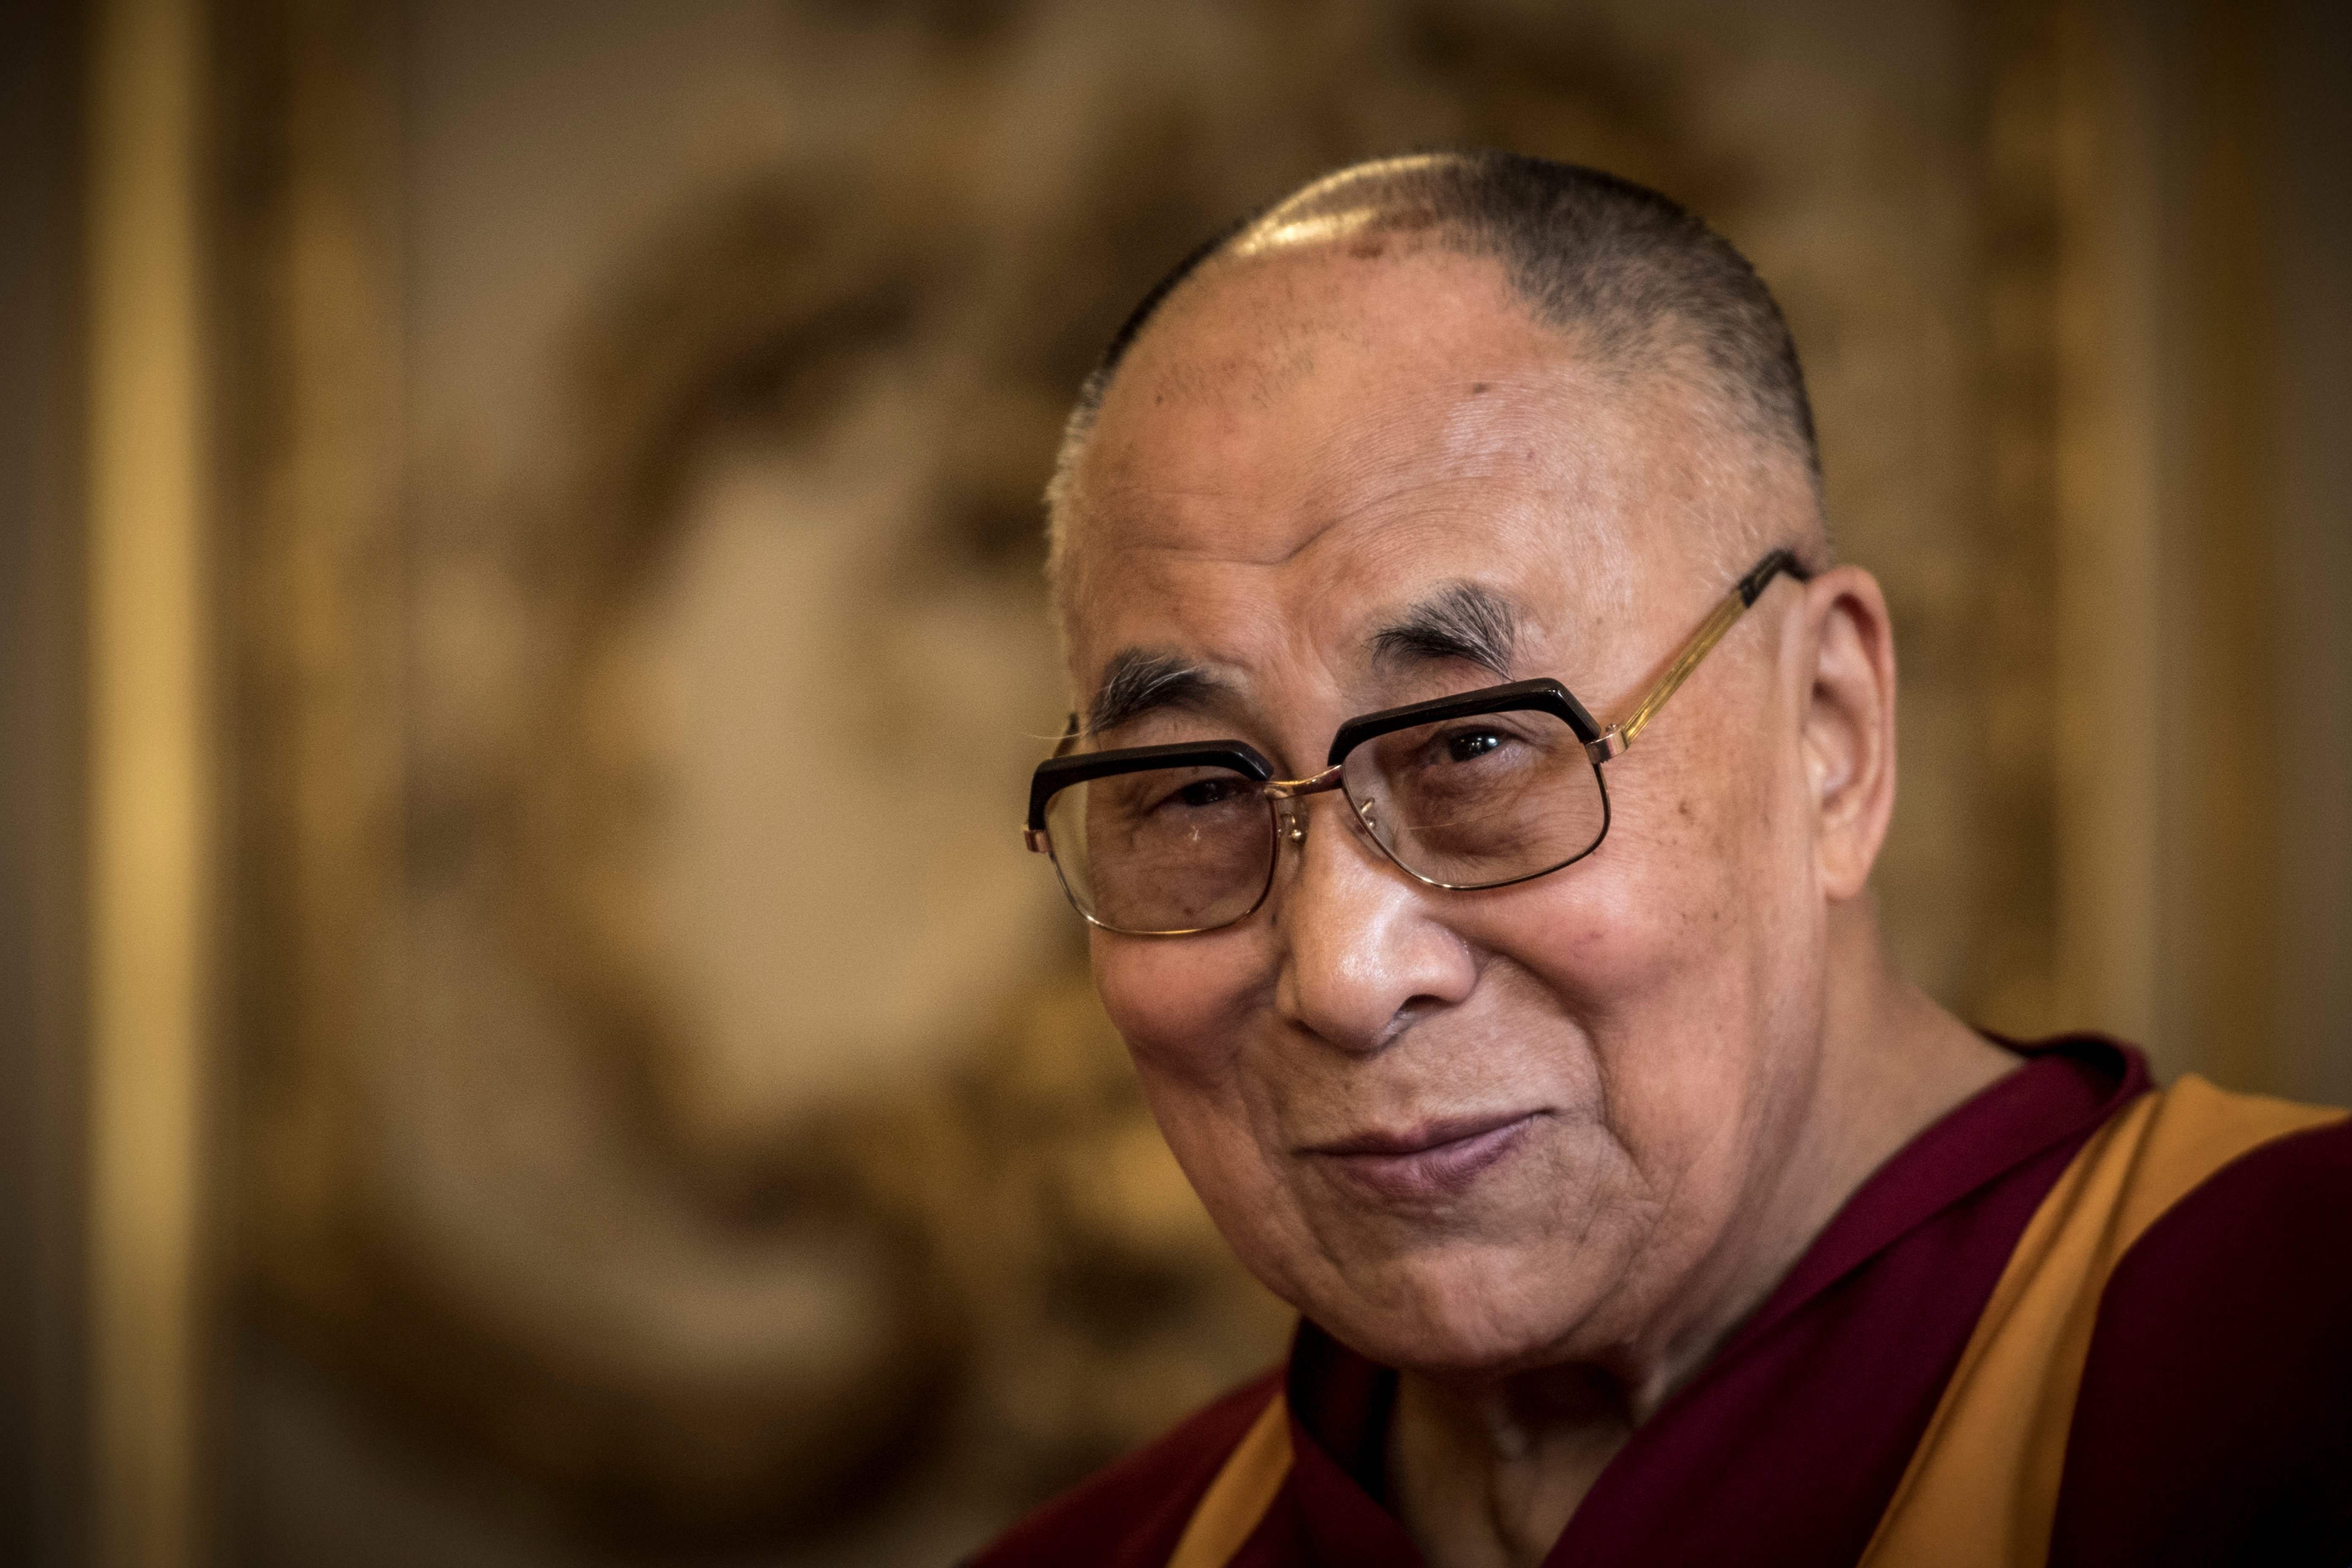 Dalai Lama, a staunch advocate for non-violence and freedom, was awarded the Nobel Peace Prize in 1989. Credit: AFP Photo